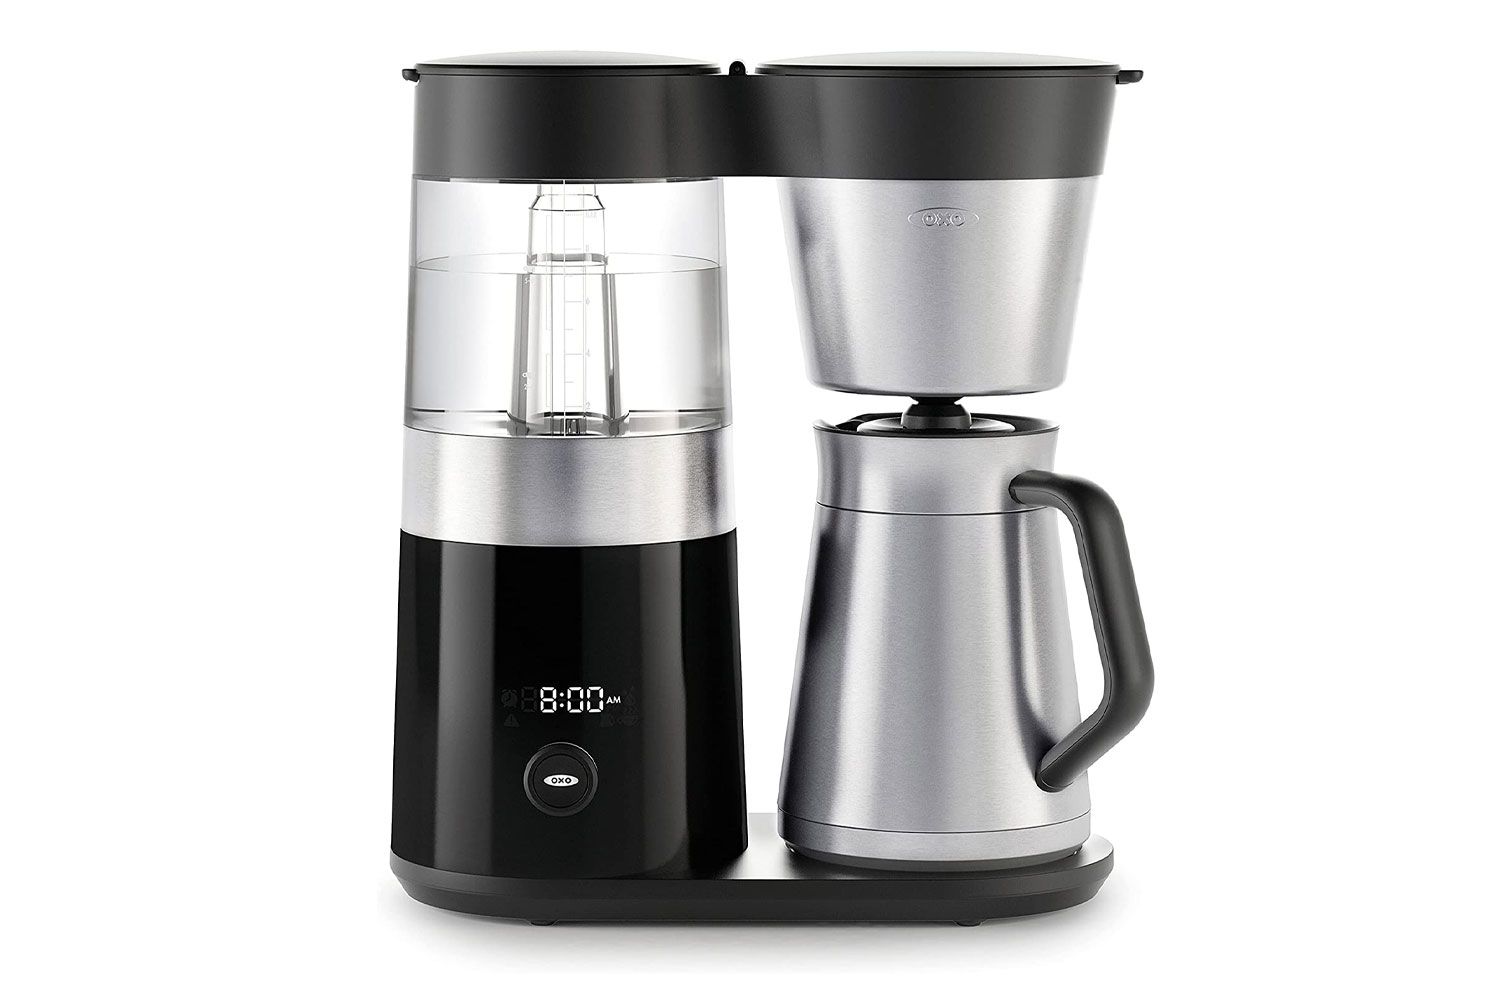 Oxo Brew 9-Cup Stainless Steel Coffee Maker